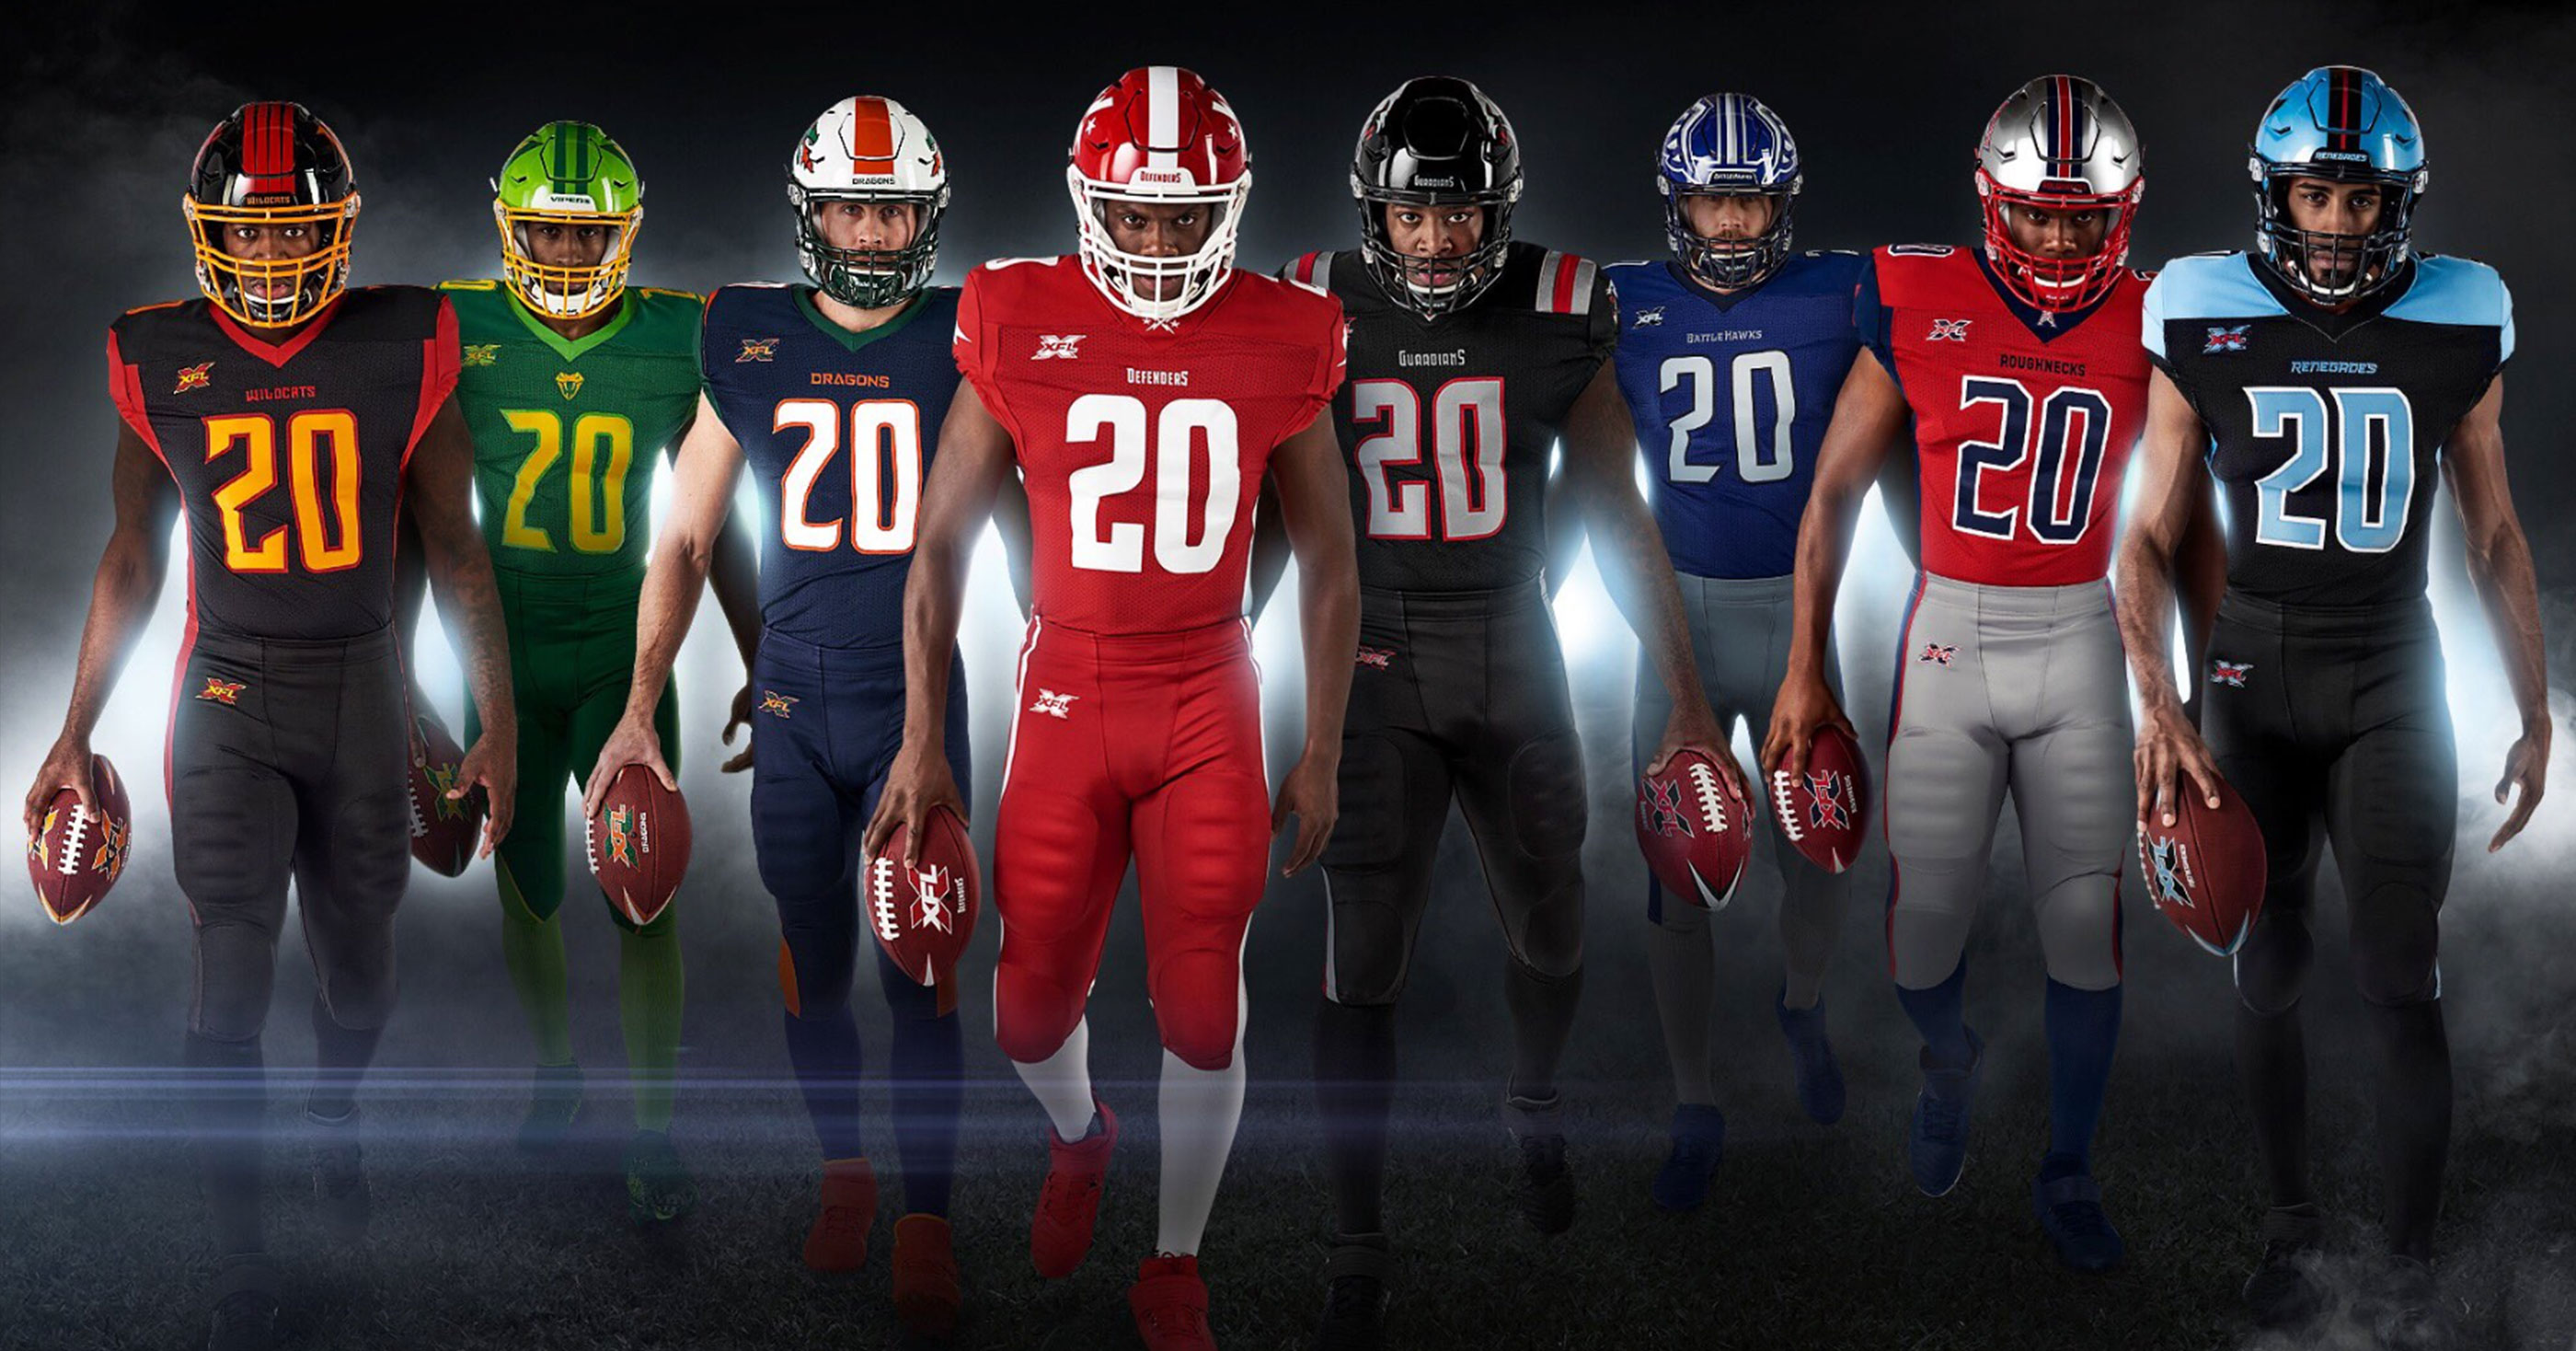 XFL Reveals The Uniforms For Its Eight Teams (PICS)